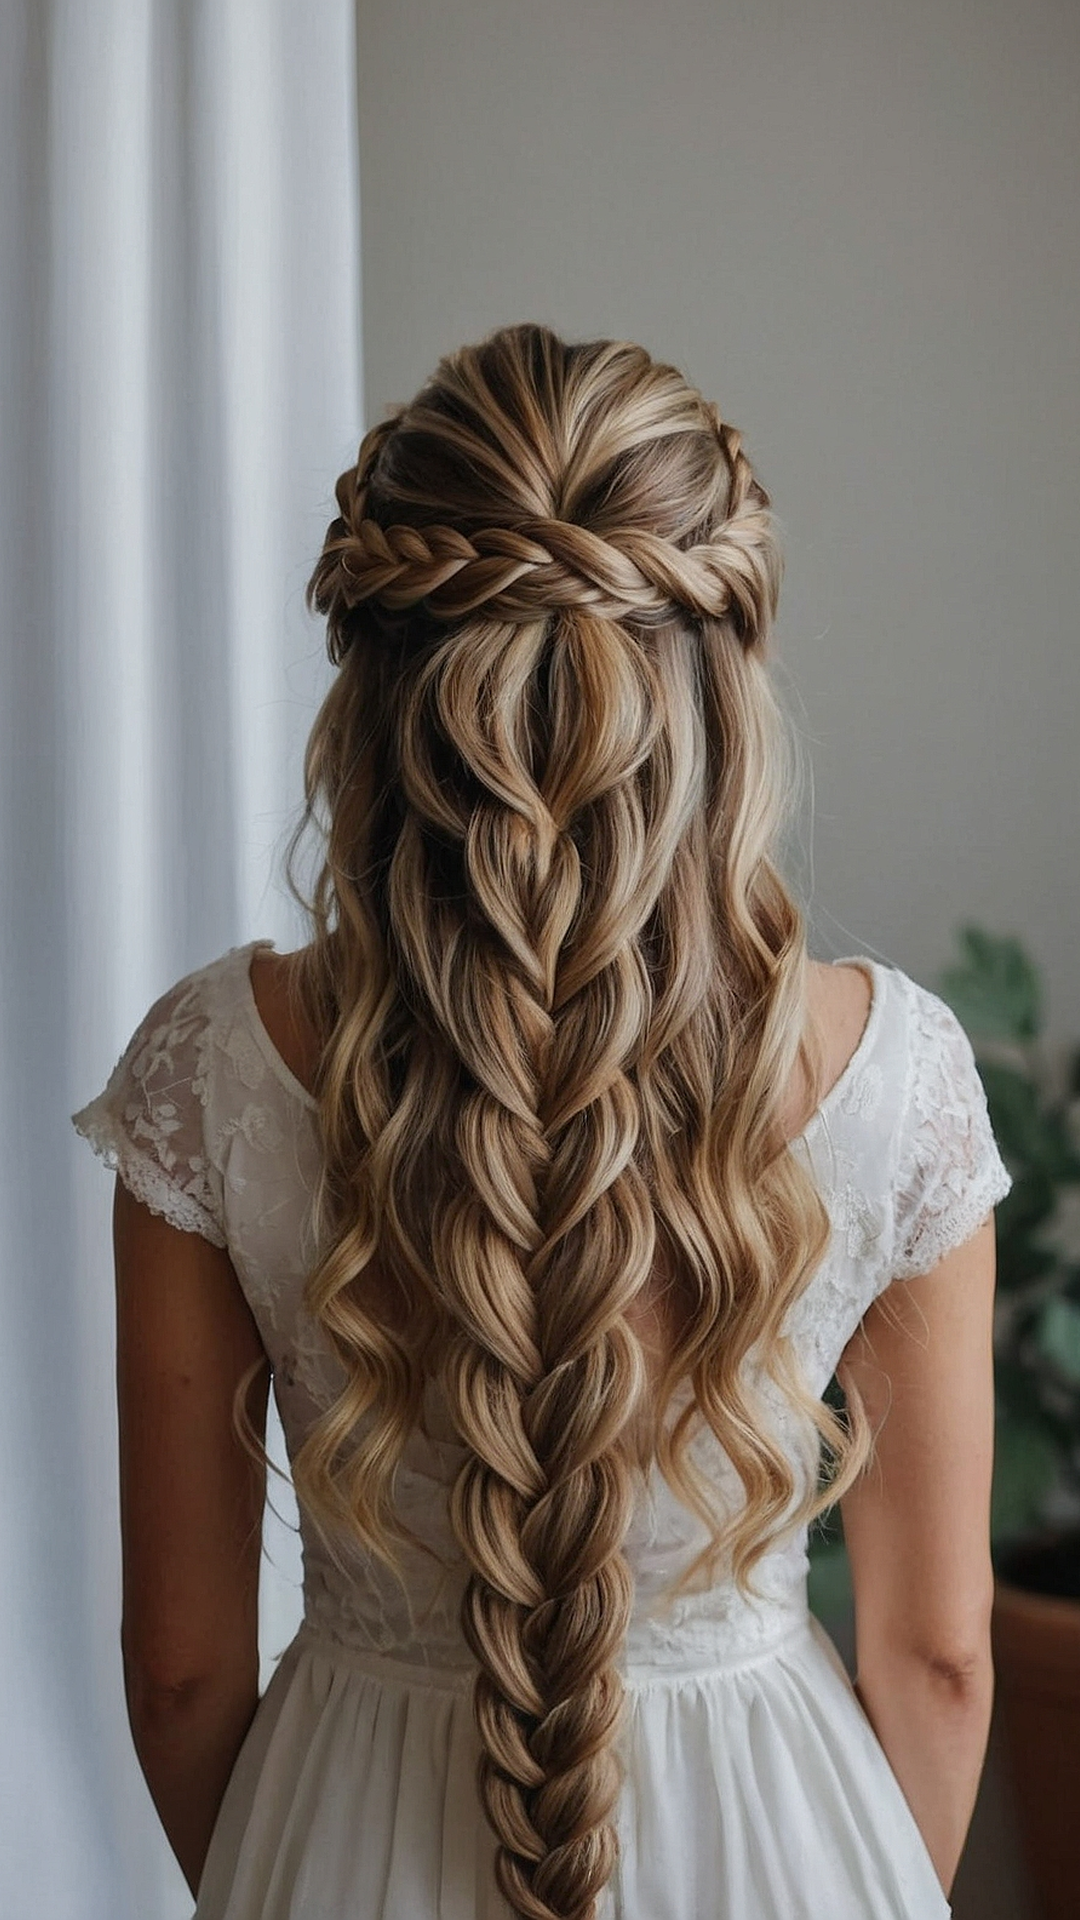 Braid Magic: Stunning Hairstyle Ideas for You